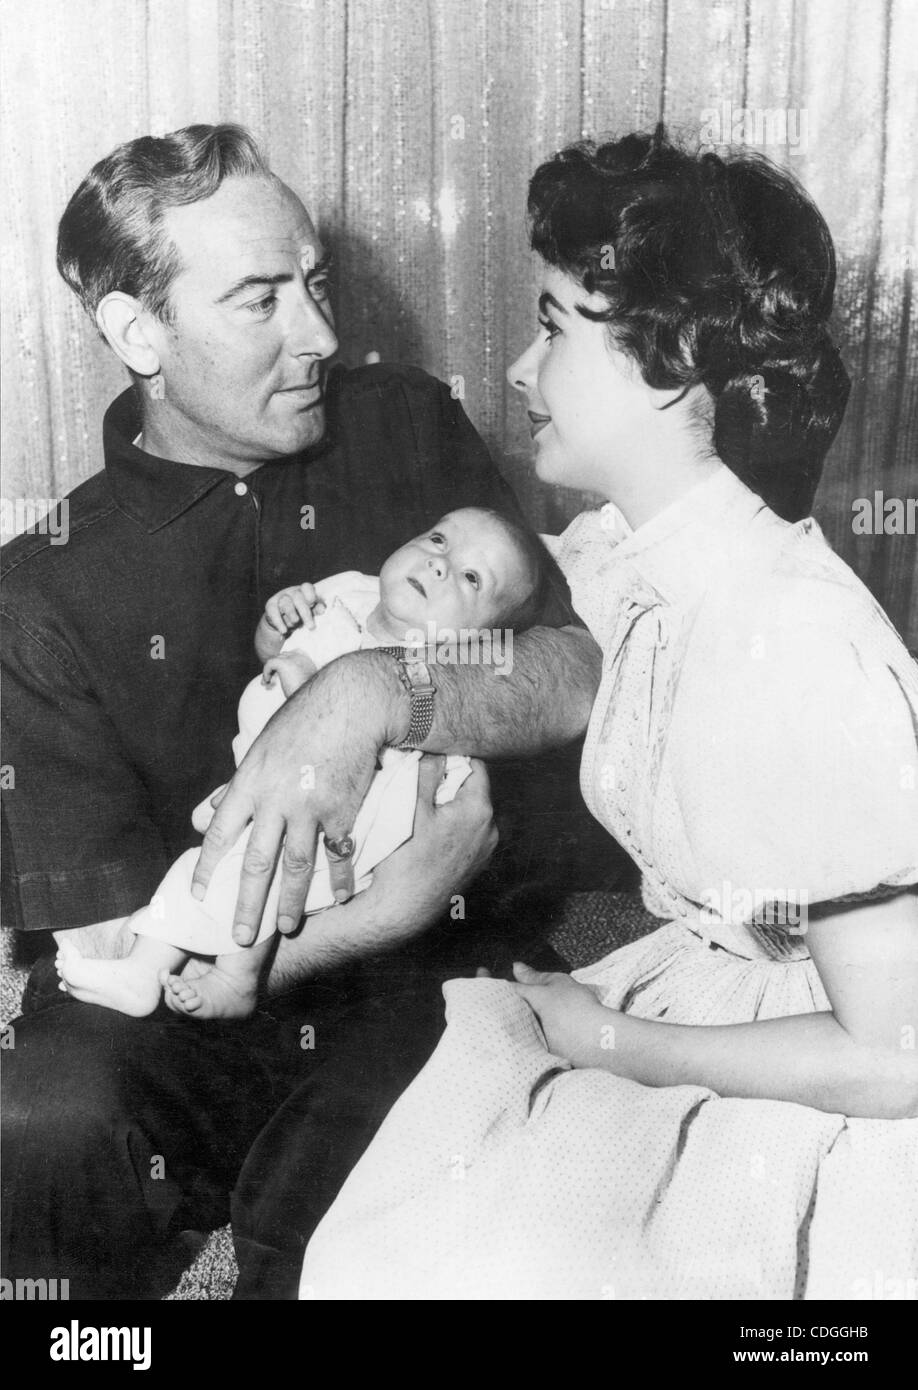 No.v 13, 1964 - Los Angeles, CA, U.S. - Actress ELIZABETH 'LIZ' TAYLOR with her second husband, American actor MICHAEL WILDING holding their newborn son CHRISTOPHER WILDING. (Credit Image: © KEYSTONE Pictures/ZUMAPRESS.com) Stock Photo